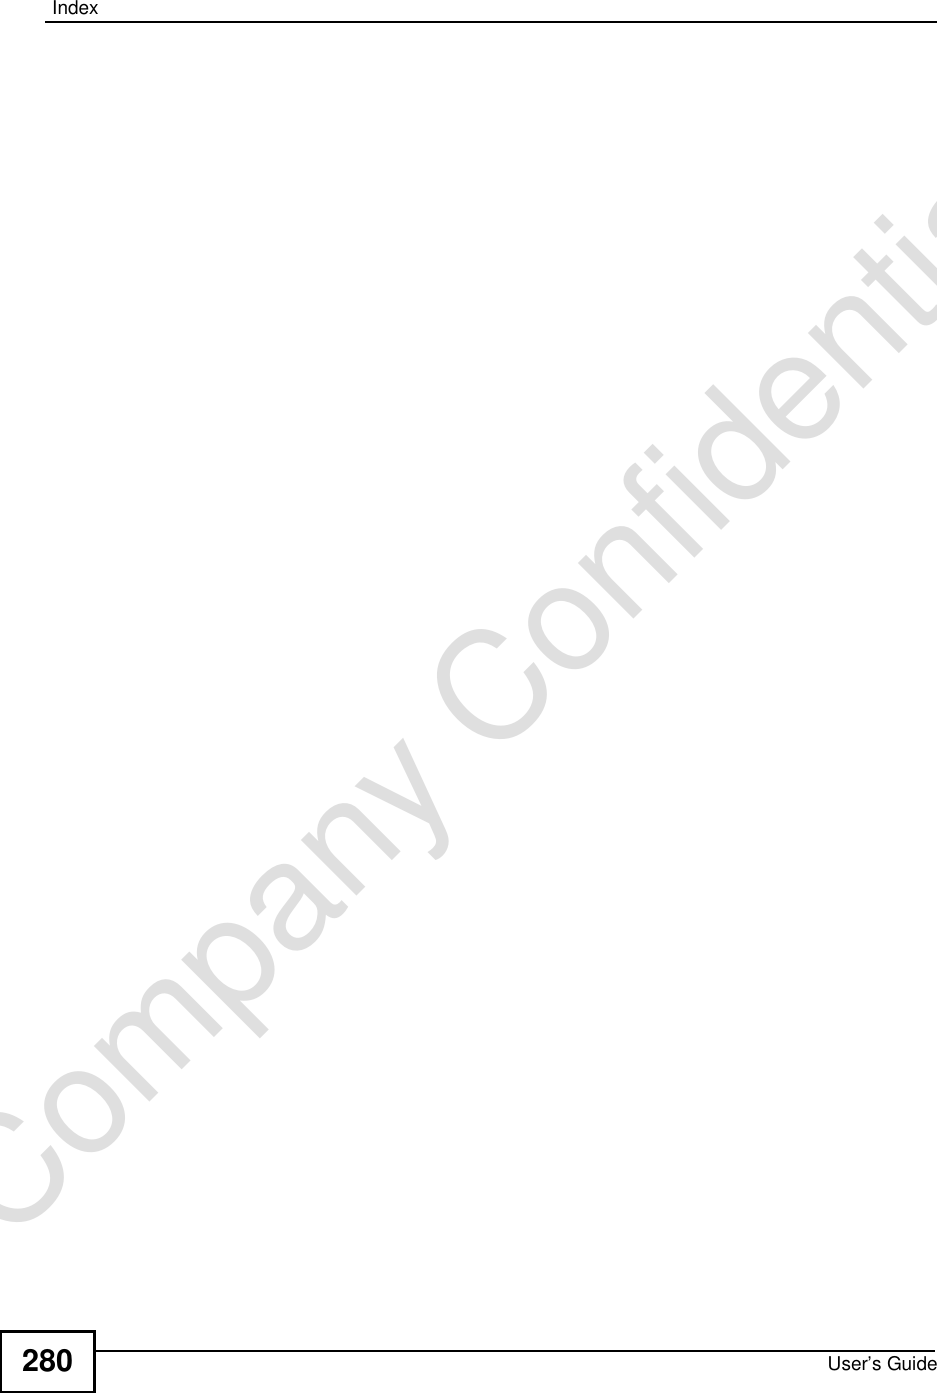 IndexUser’s Guide280Company Confidential